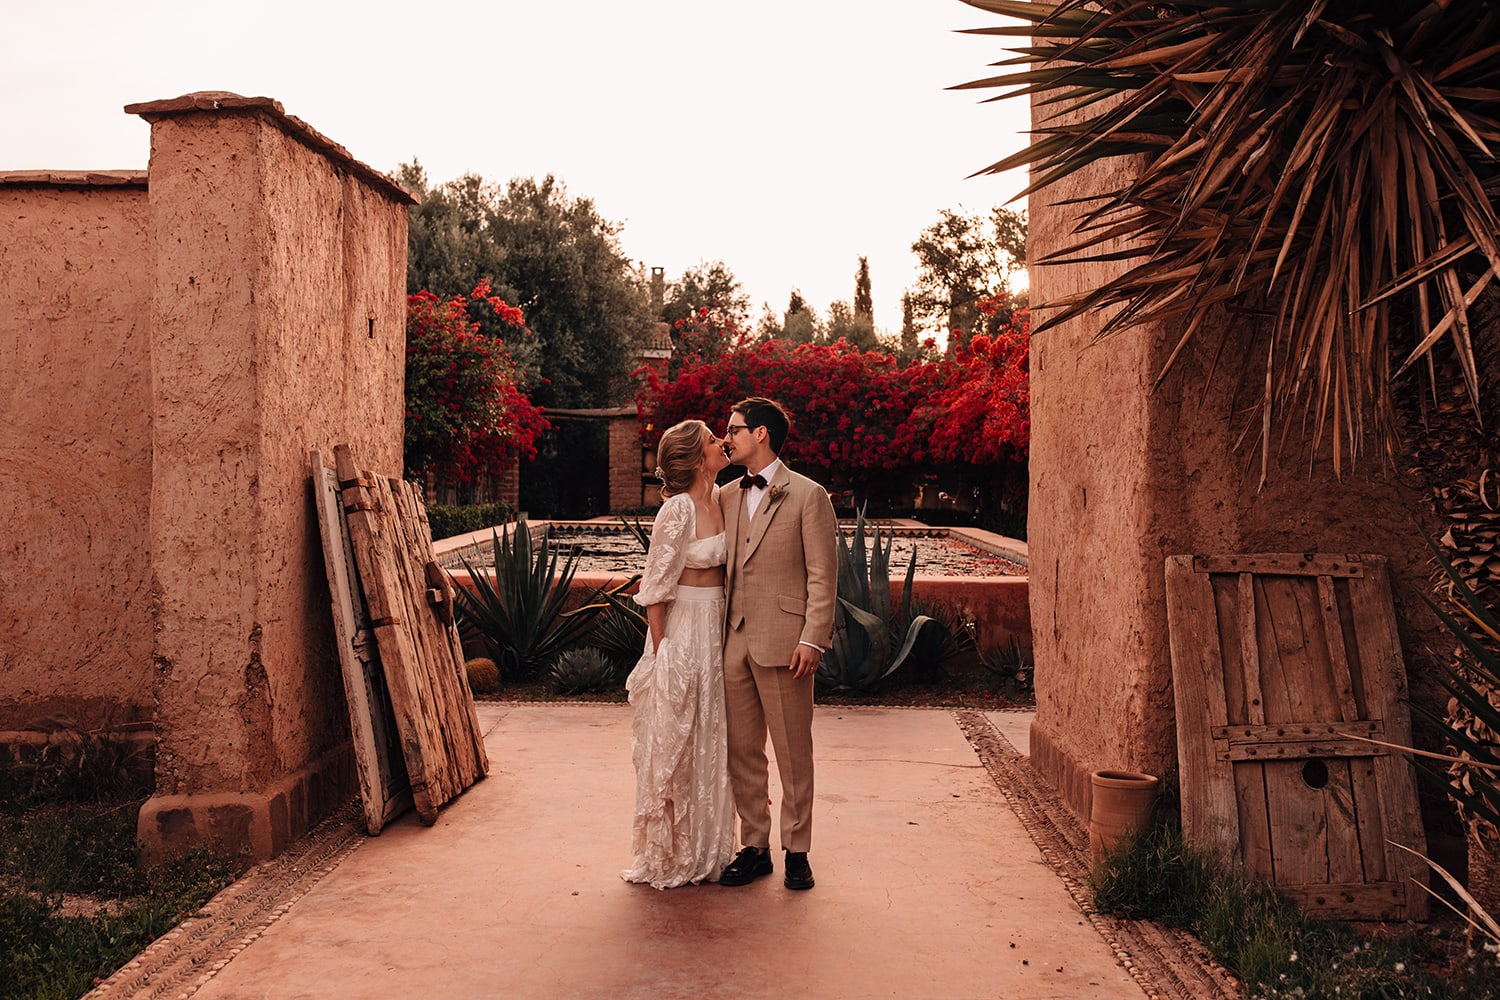 Bride dressed in Grace Loves Lace wedding dress embracing her Groom at the Beldi Country Club in Marrakesh